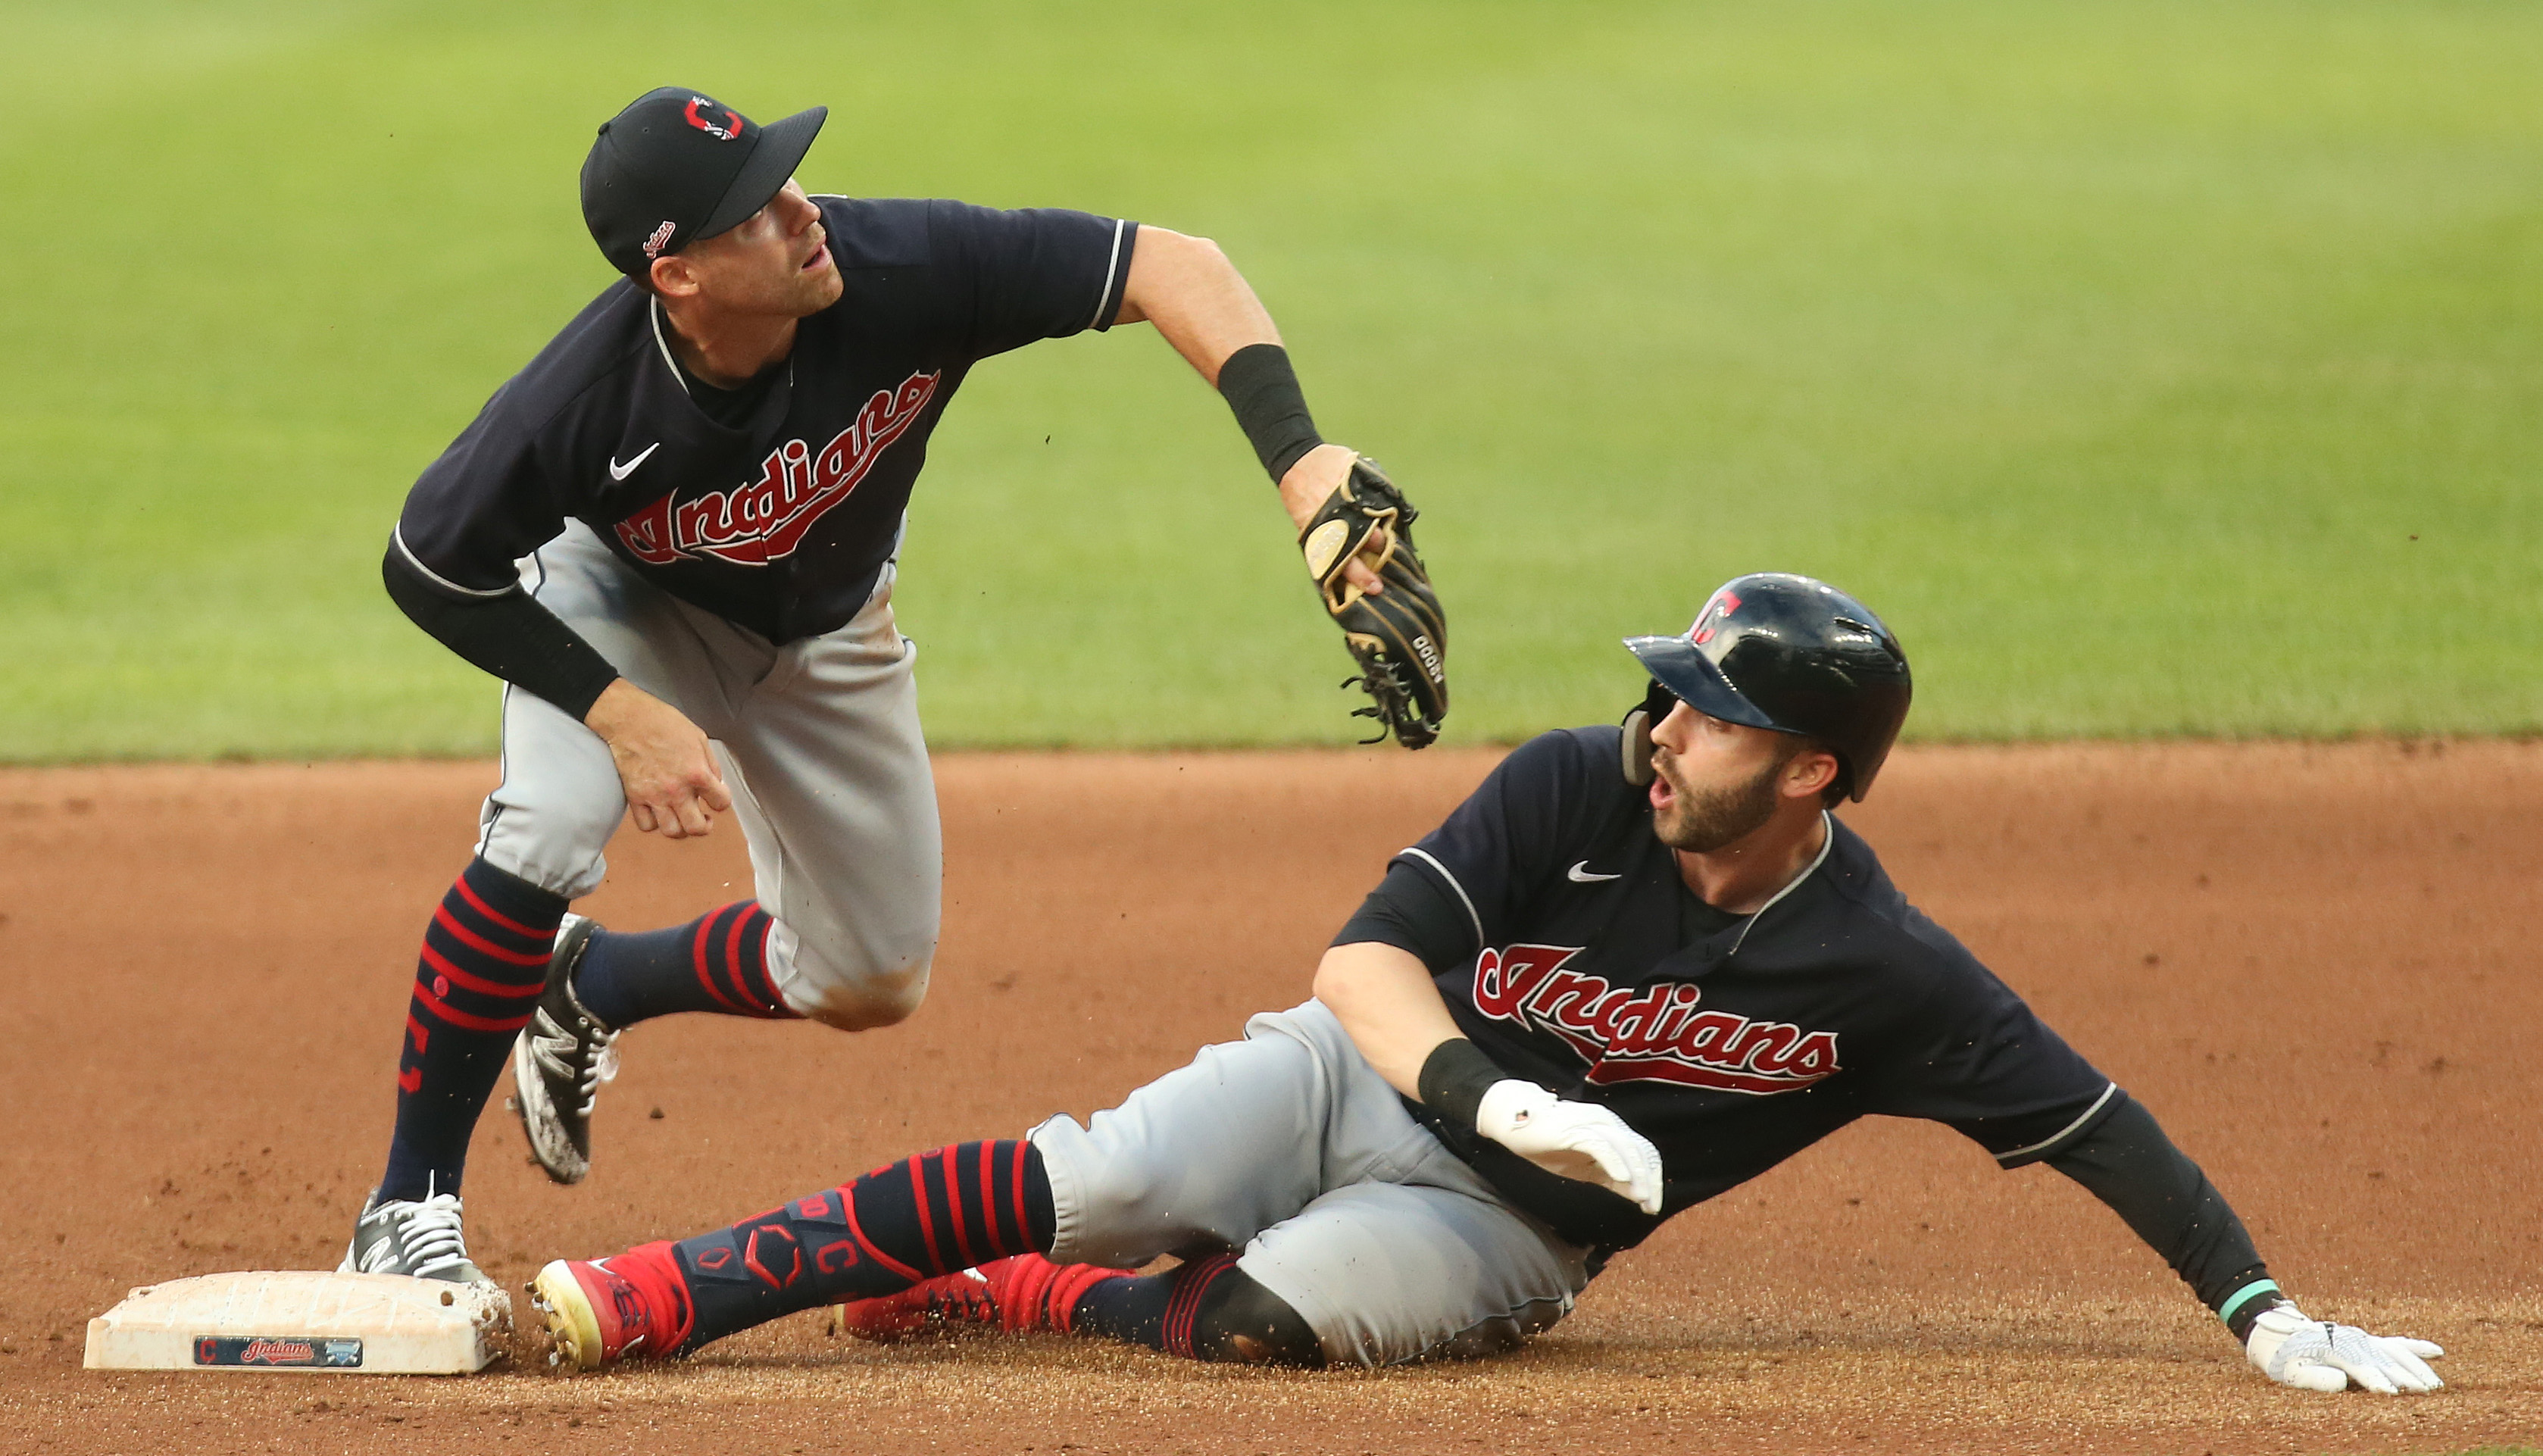 Tyler Naquin on Cleveland Indians' success: 'We're going to keep